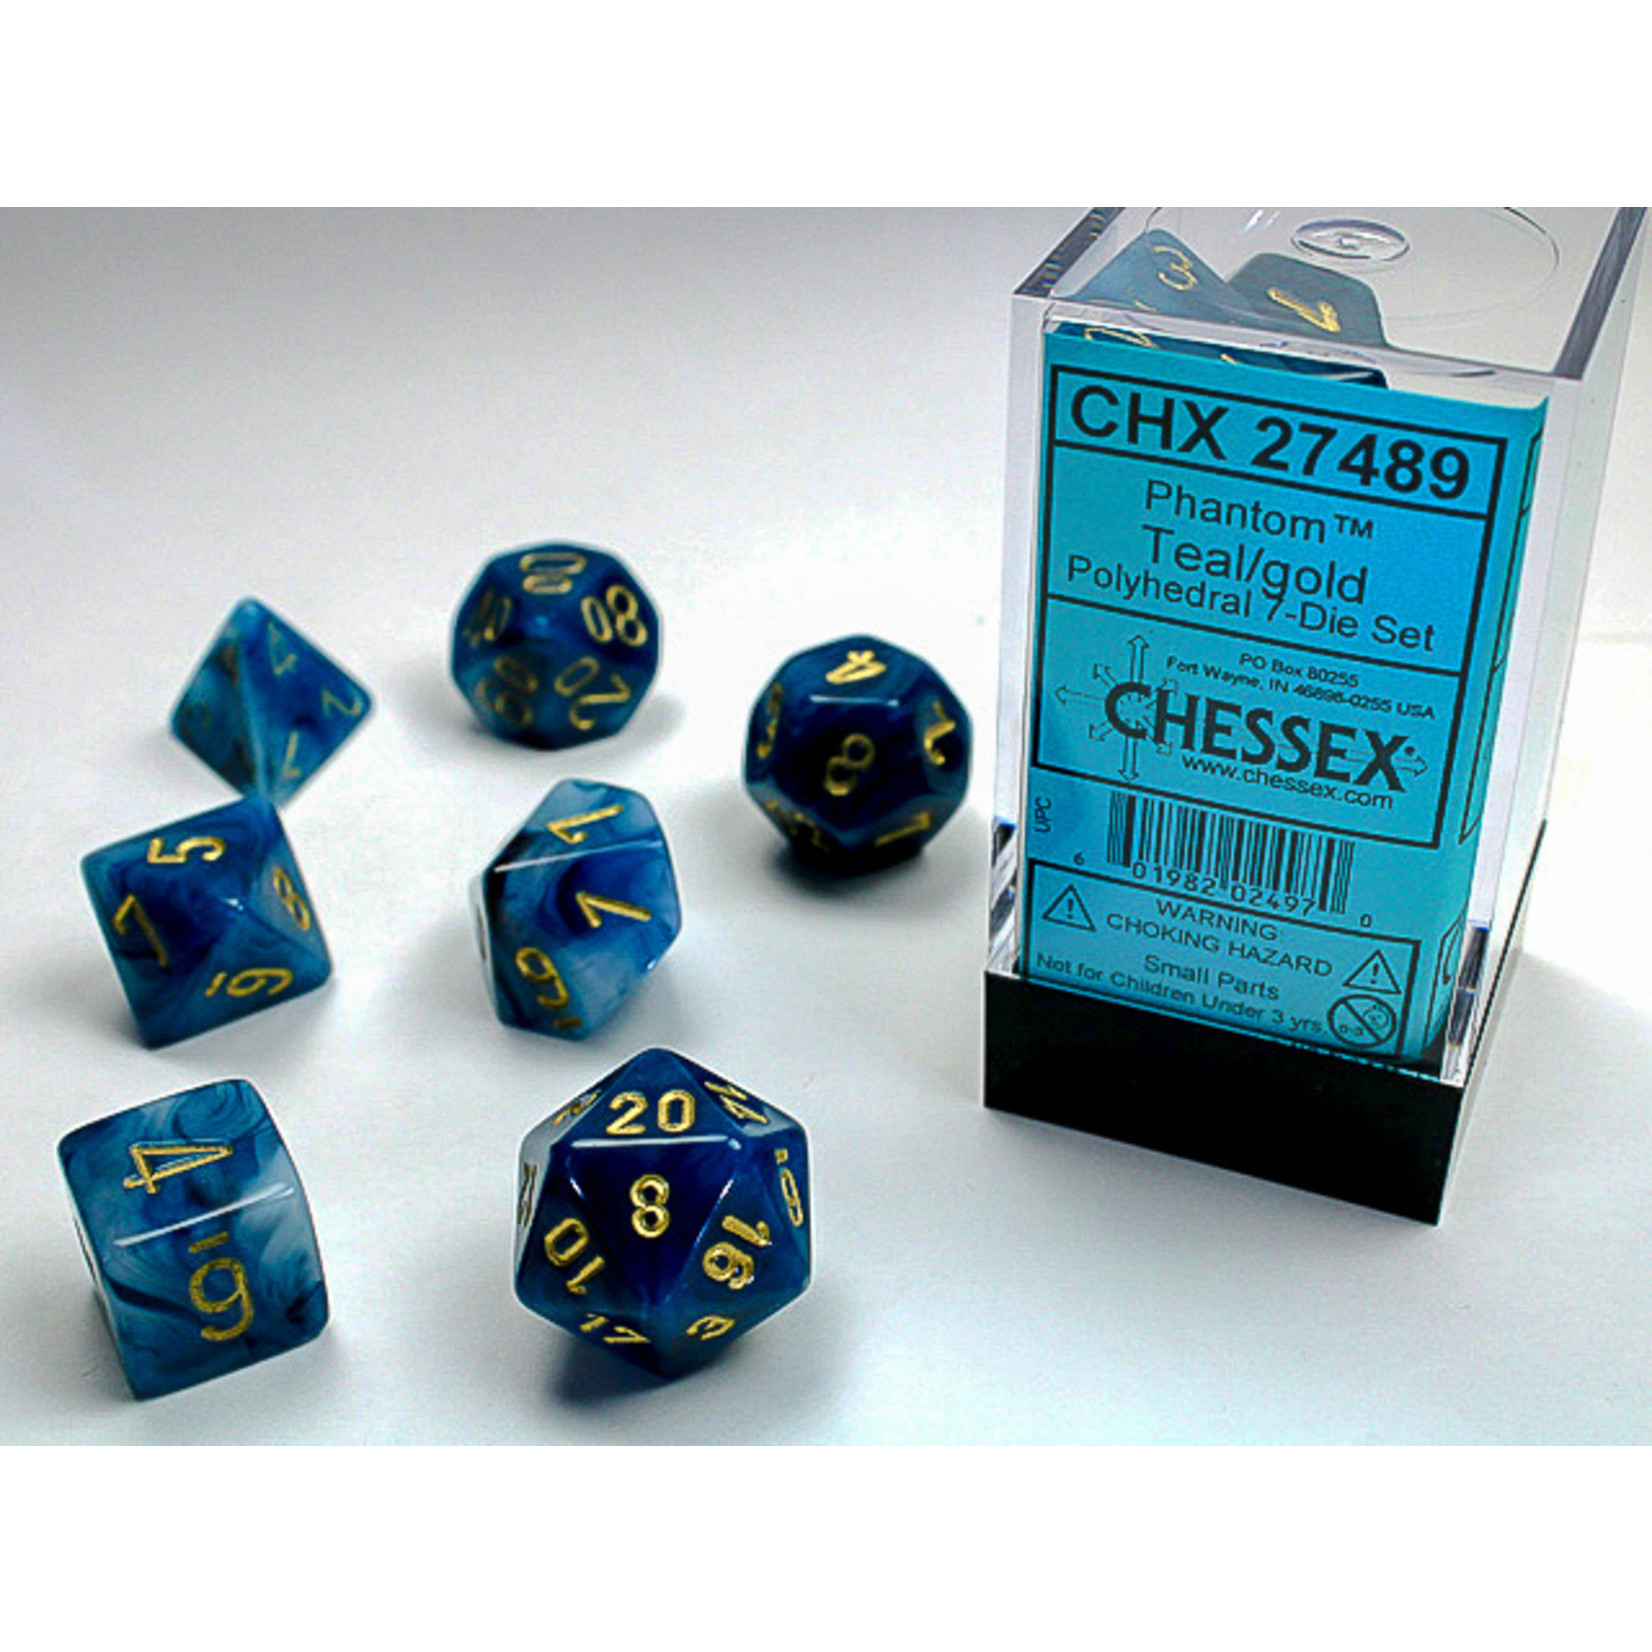 Chessex 27489 Phantom Teal with Gold 7-Set